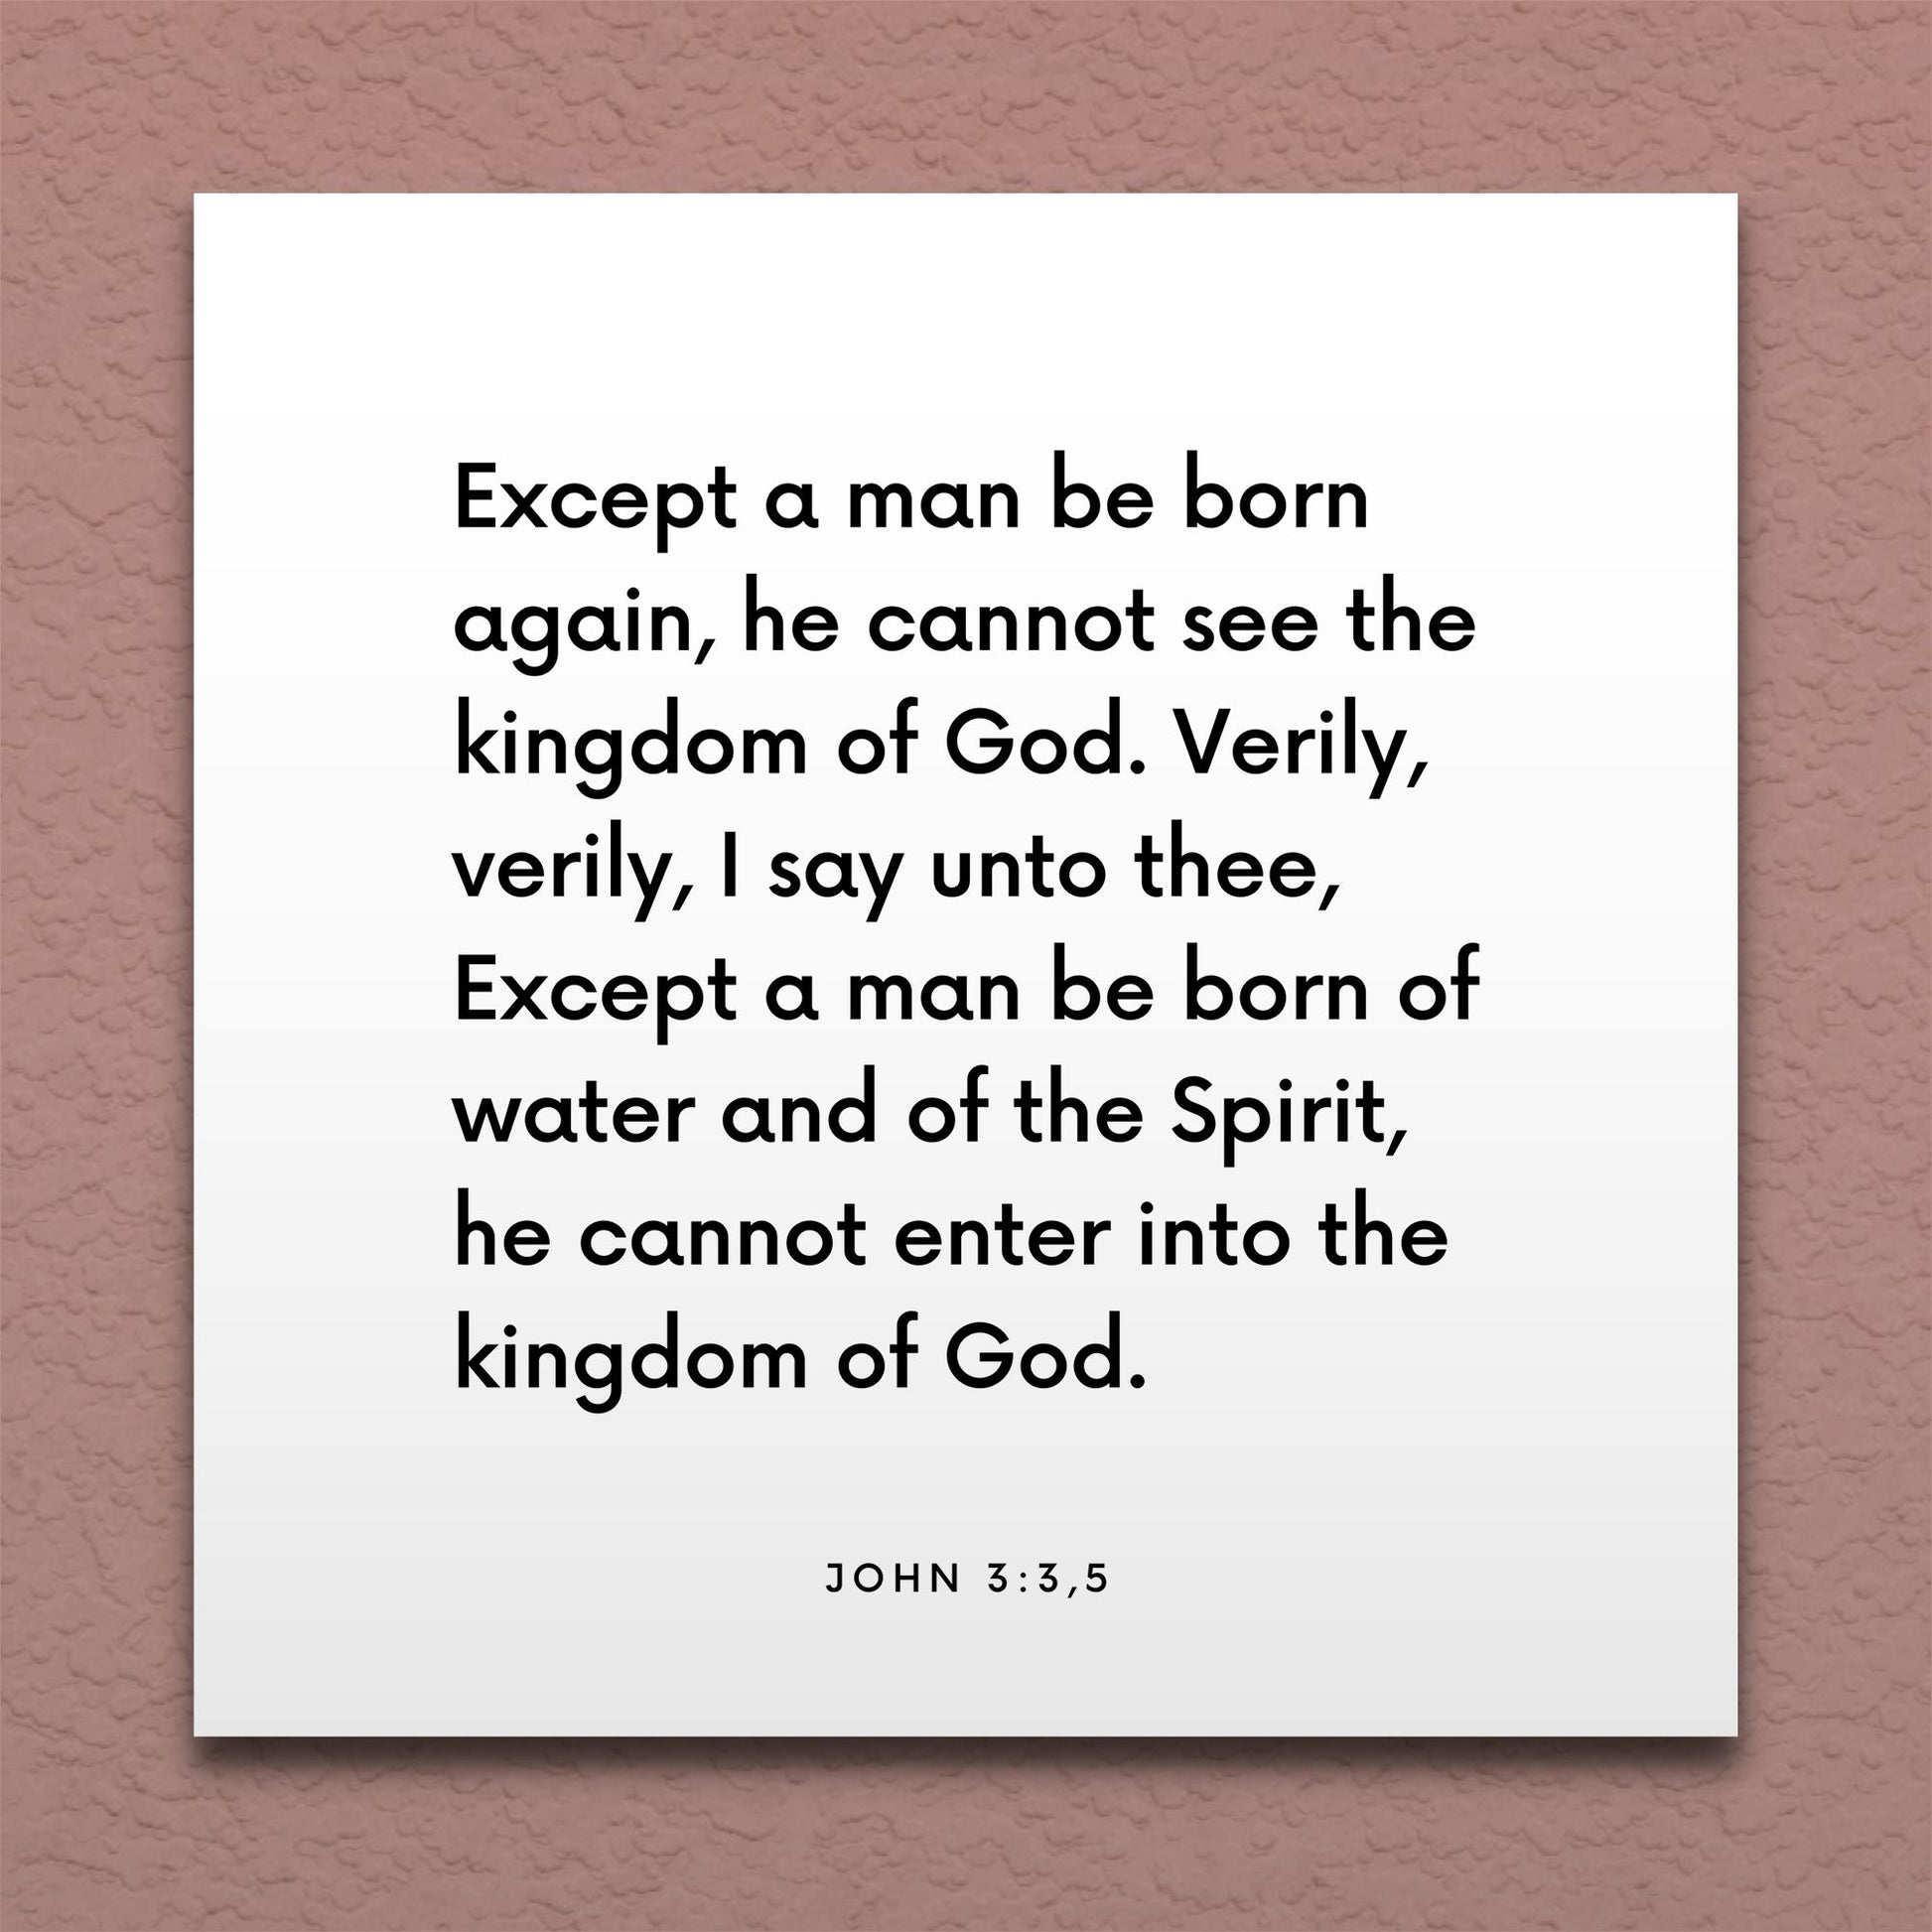 Wall-mounted scripture tile for John 3:3,5 - "Except a man be born again, he cannot see the kingdom of God"